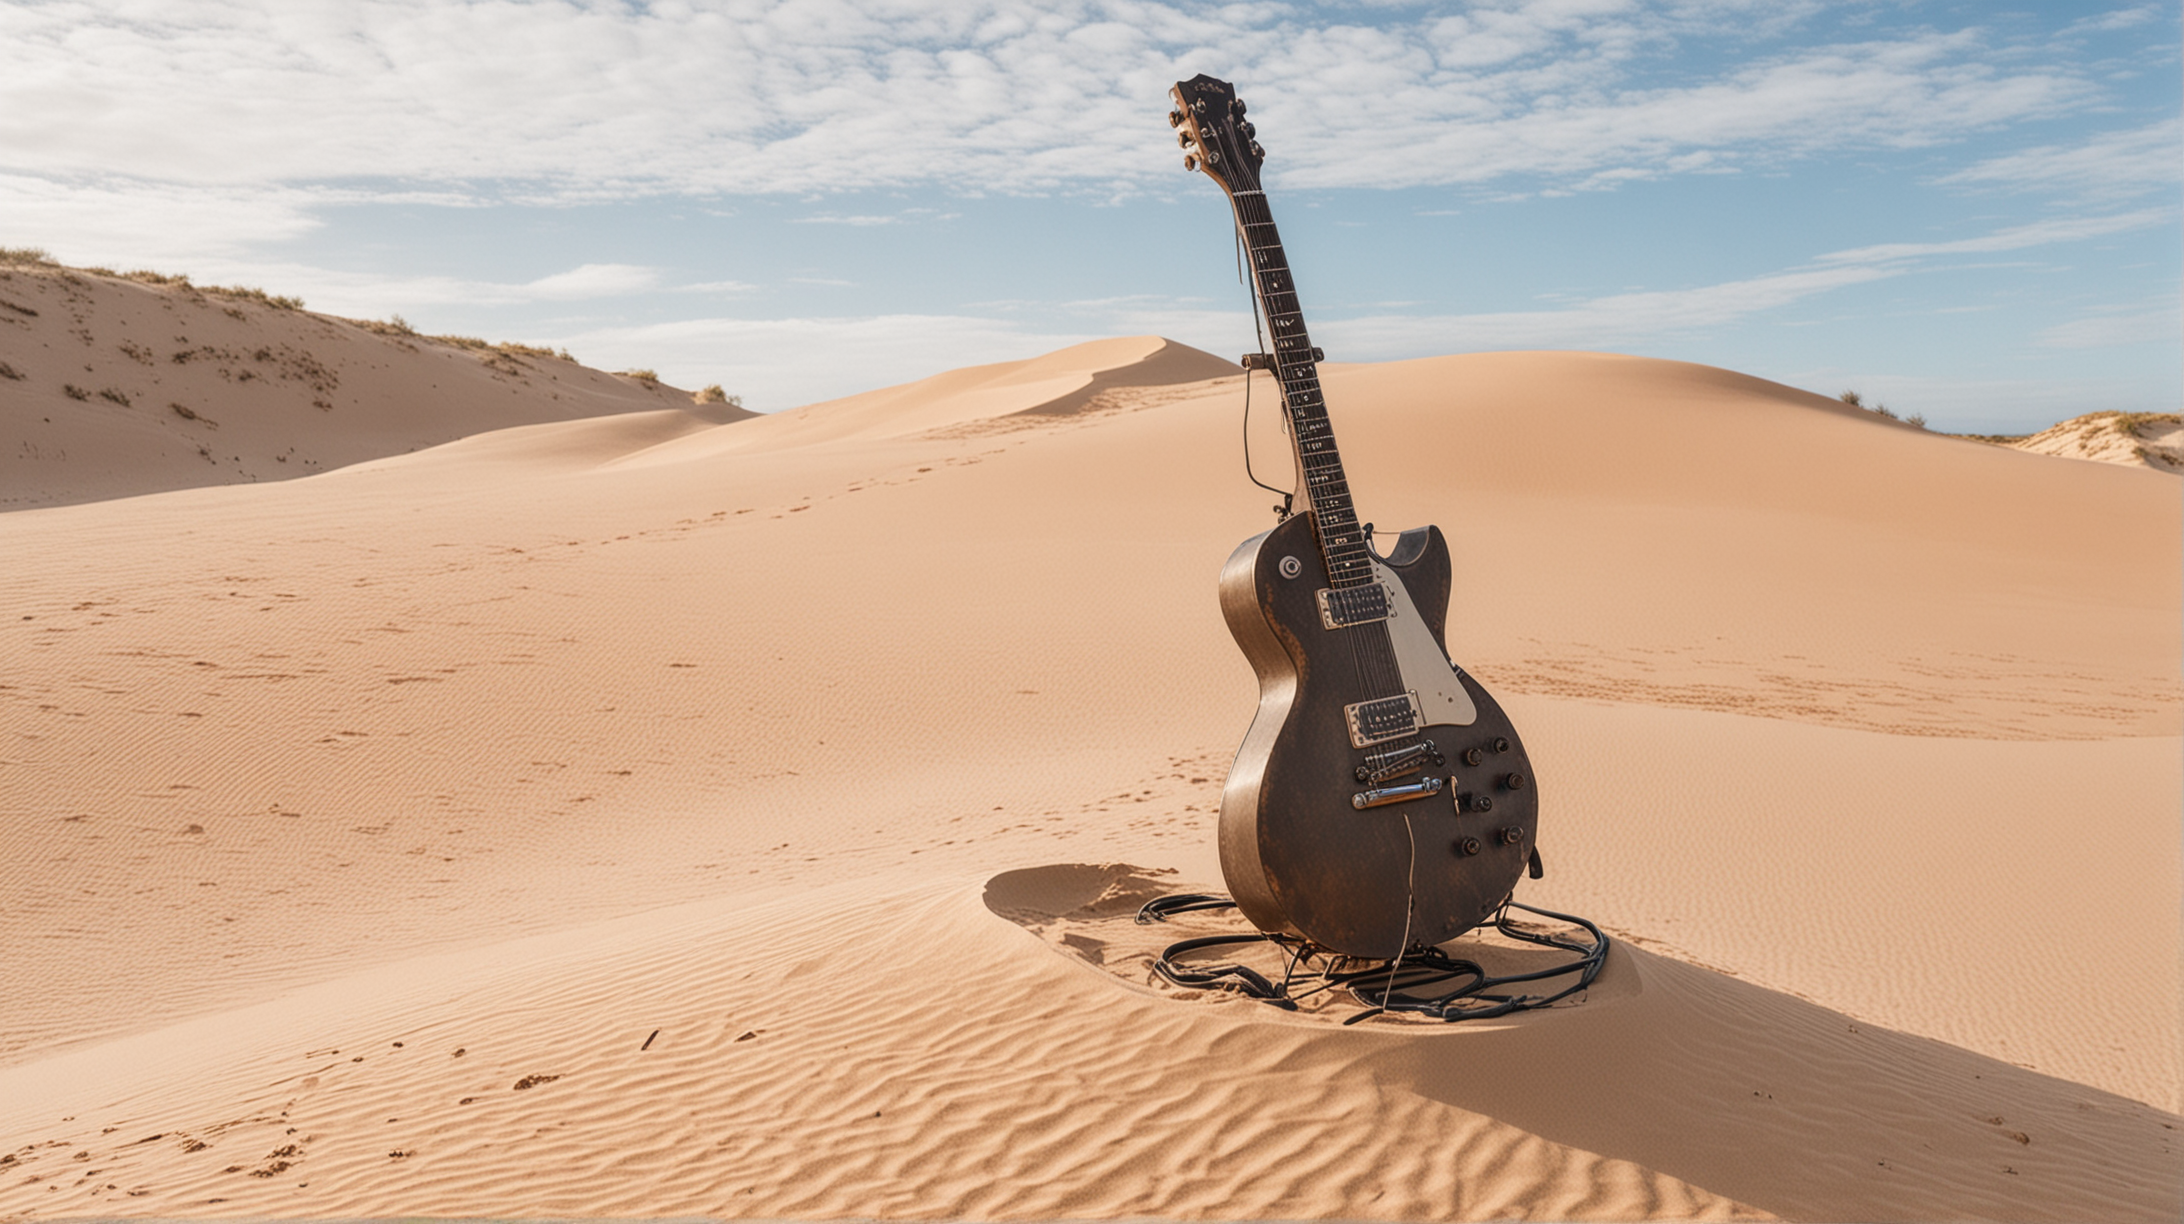 Large Statue of guitar built out of metal standing vertical on top of a sand dune